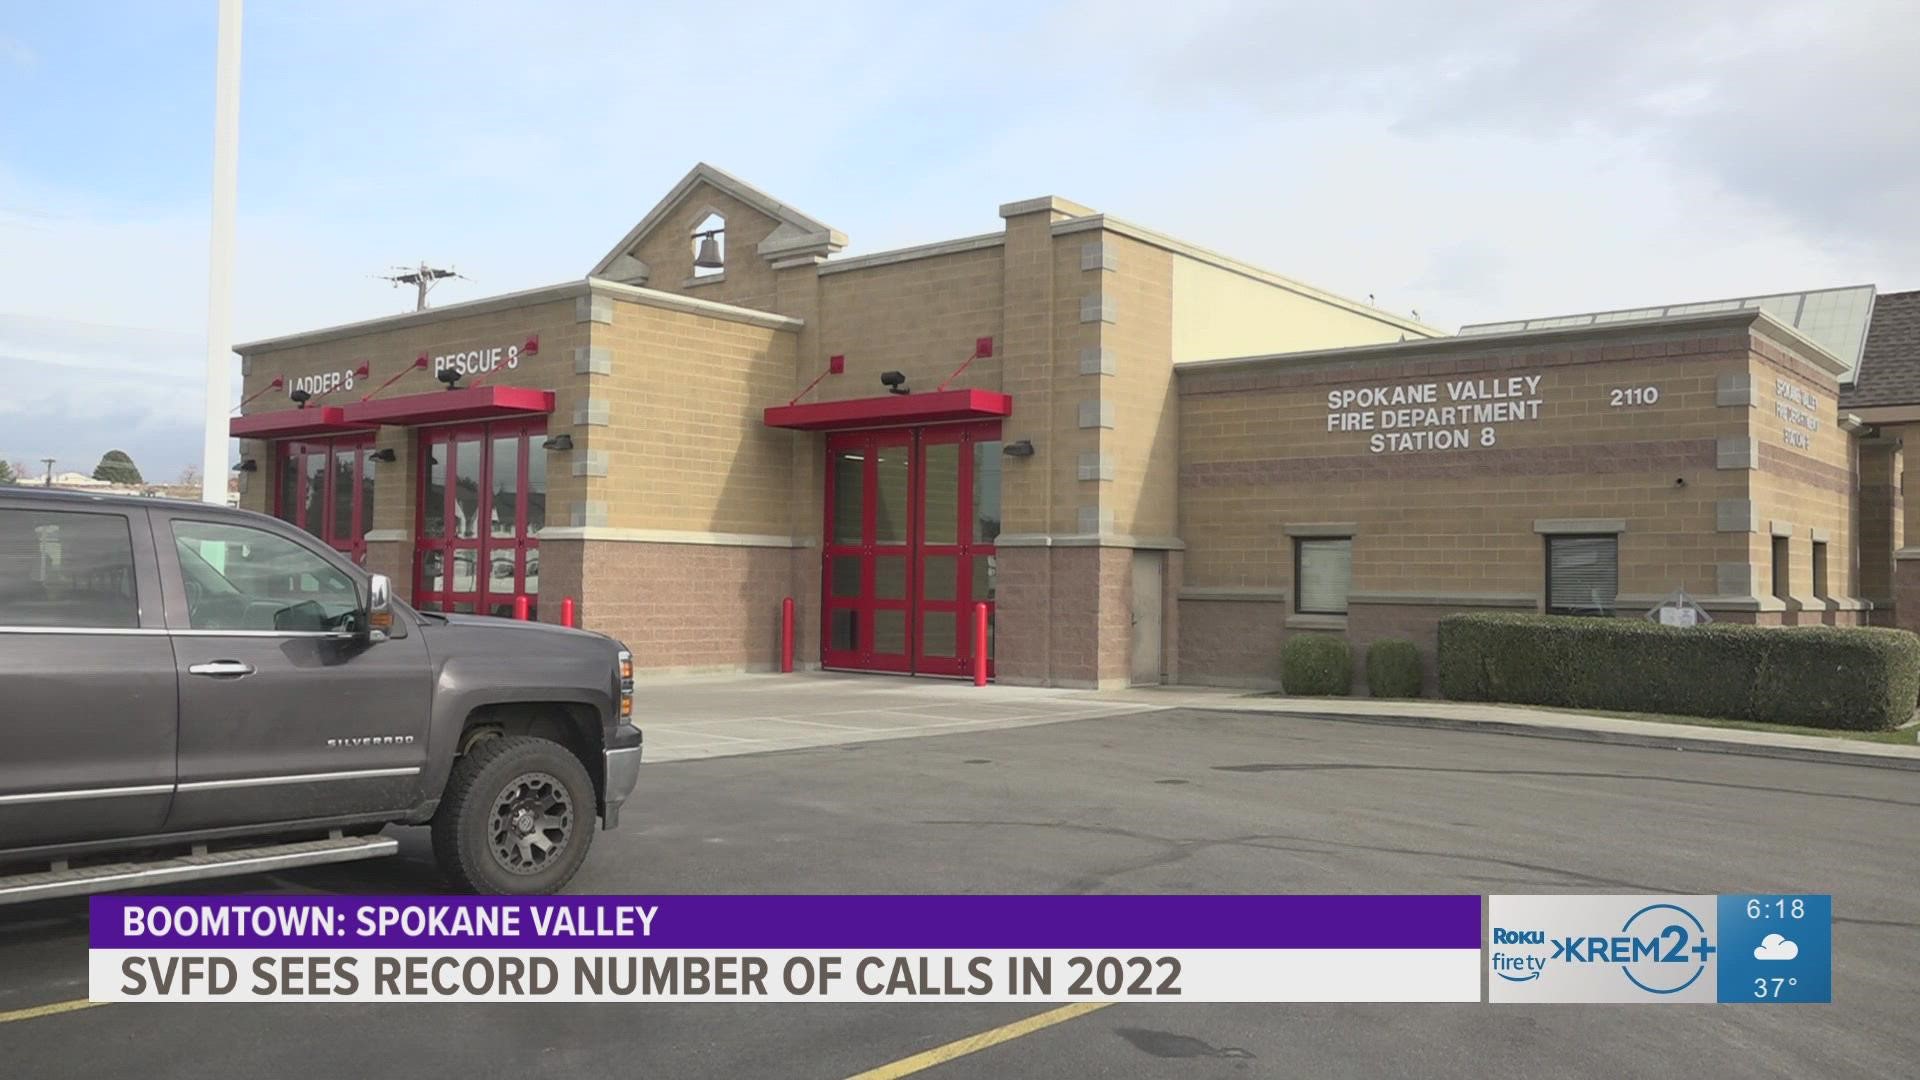 Spokane Valley Fire said 2022 was an unprecedented year for service. The department said crews responded to 23,200 incidents, the most in any year in its history.